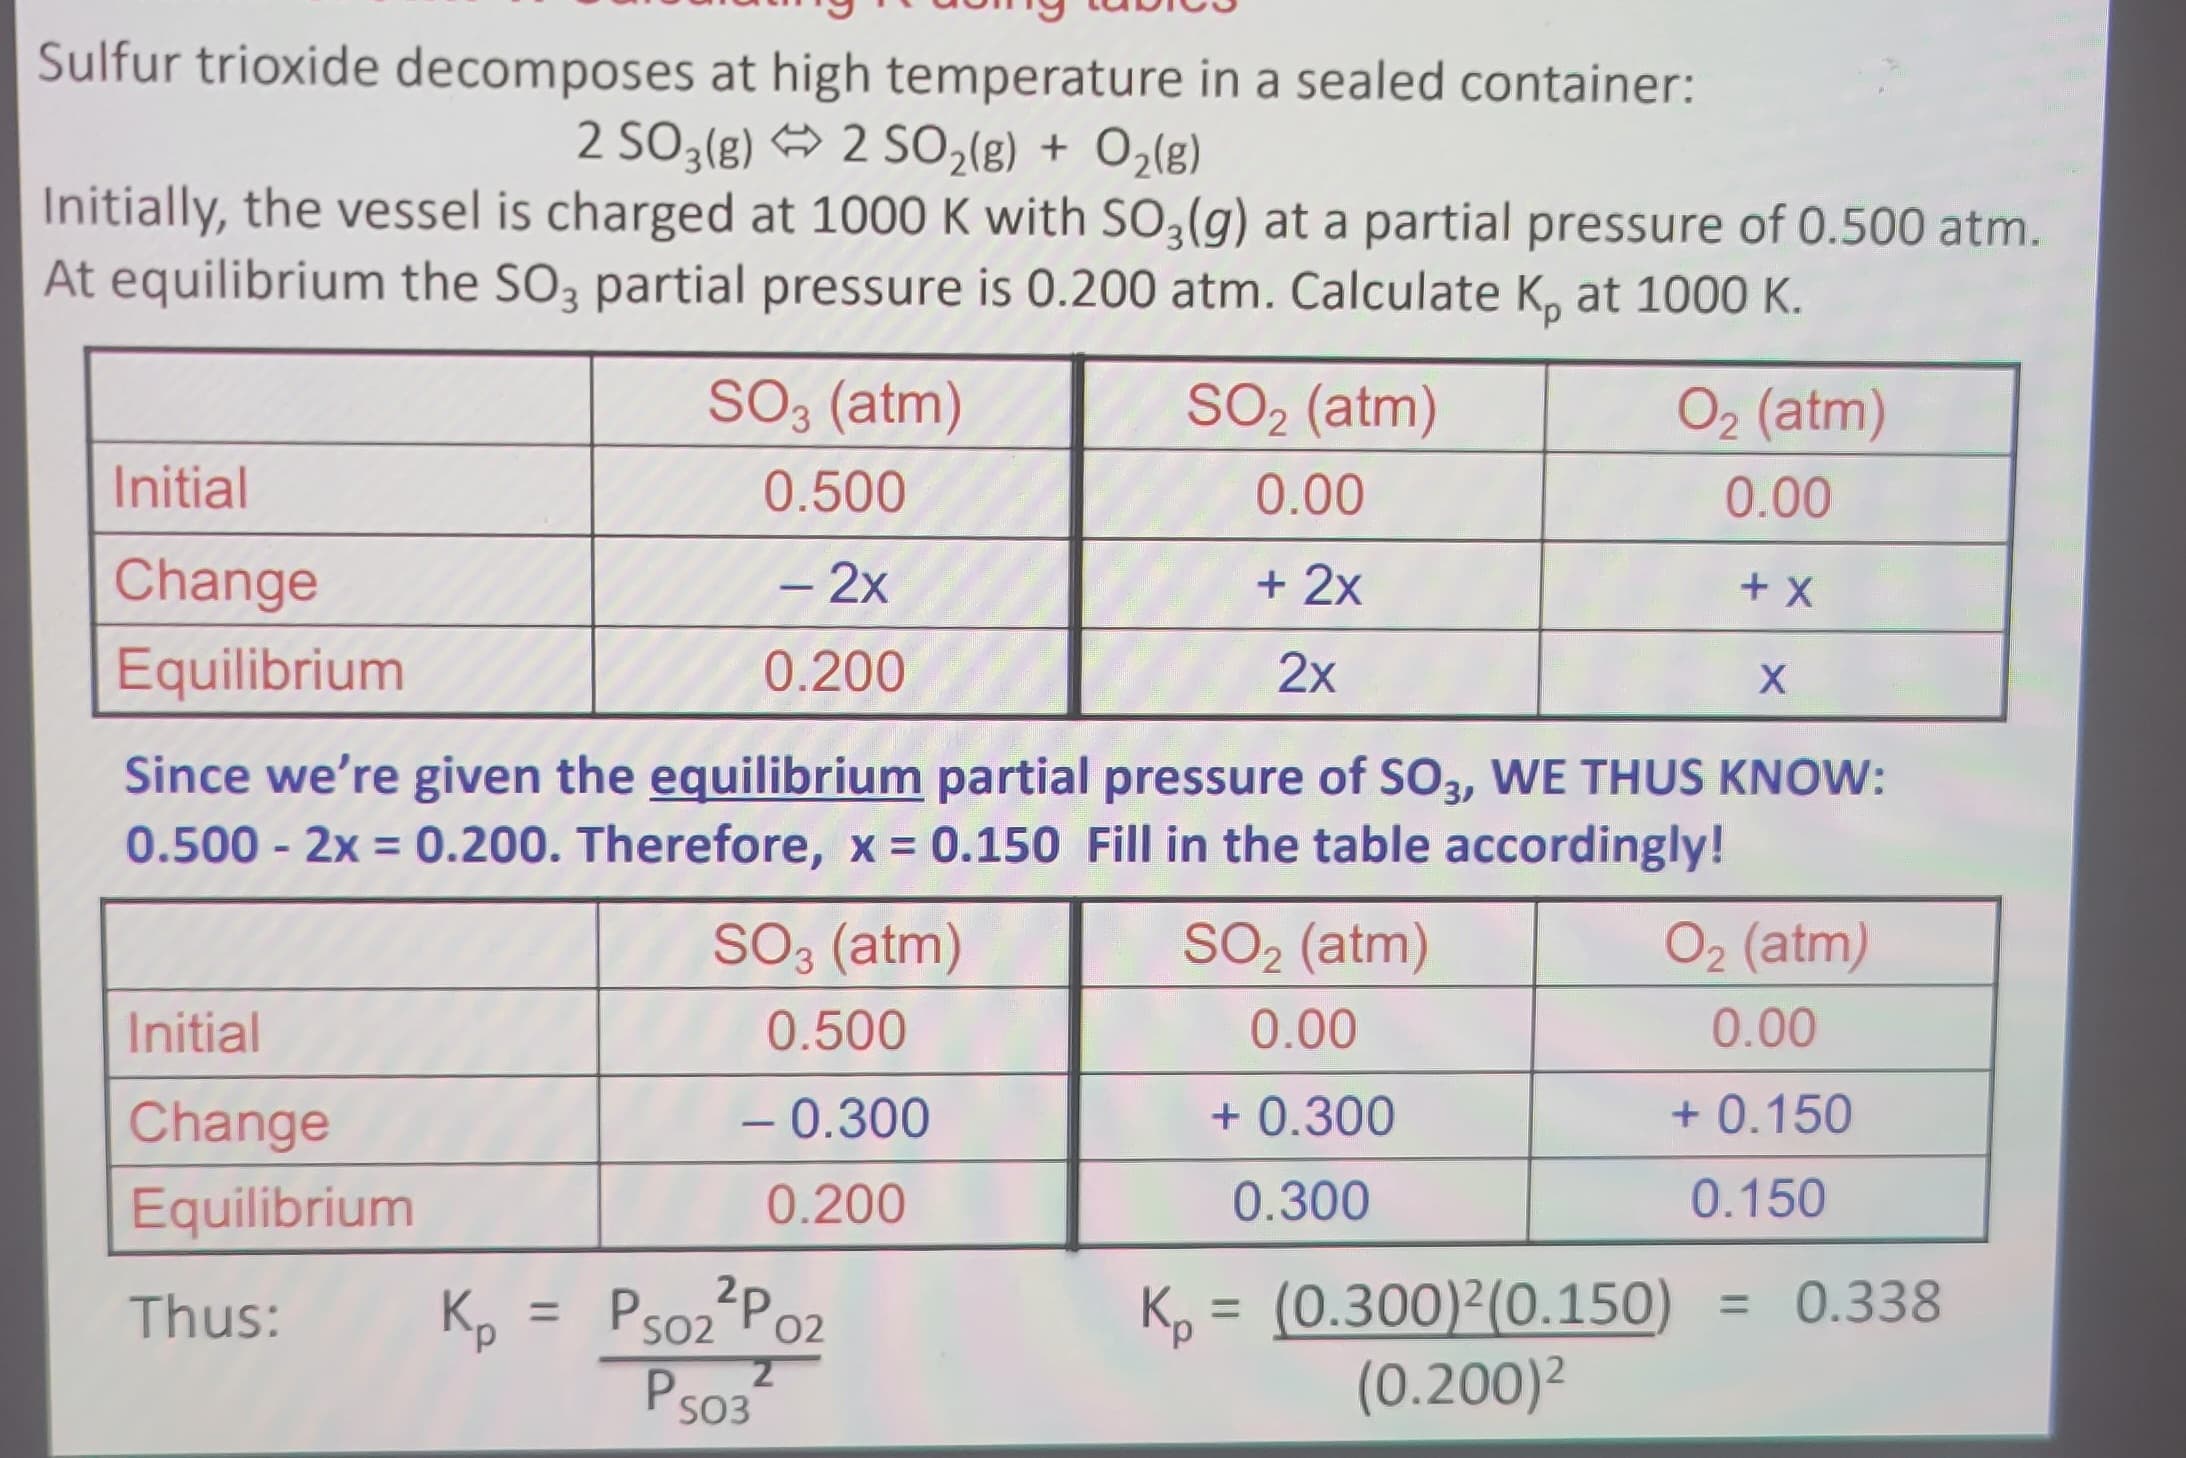 Sulfur trioxide decomposes at high temperature in a sealed container:
2 SO3(g) 2 SO2(g) + O2(g)
Initially, the vessel is charged at 1000 K with SO3(g) at a partial pressure of 0.500 atm.
At equilibrium the SO3 partial pressure is 0.200 atm. Calculate K, at 1000 K.
SO3 (atm)
0.500
SO₂ (atm)
0.00
02 (atm)
Initial
Change
Equilibrium
- 2x
0.200
+ 2x
2x
0.00
+ X
X
Initial
Since we're given the equilibrium partial pressure of SO3, WE THUS KNOW:
0.500 - 2x = 0.200. Therefore, x = 0.150 Fill in the table accordingly!
SO3 (atm)
0.500
Change
- 0.300
SO2 (atm)
0.00
+ 0.300
O2 (atm)
0.00
+ 0.150
Equilibrium
0.200
0.300
0.150
Thus: Kp
=
Ps02 P02
PS03
2
K = (0.300)2(0.150)
(0.200) 2
= 0.338